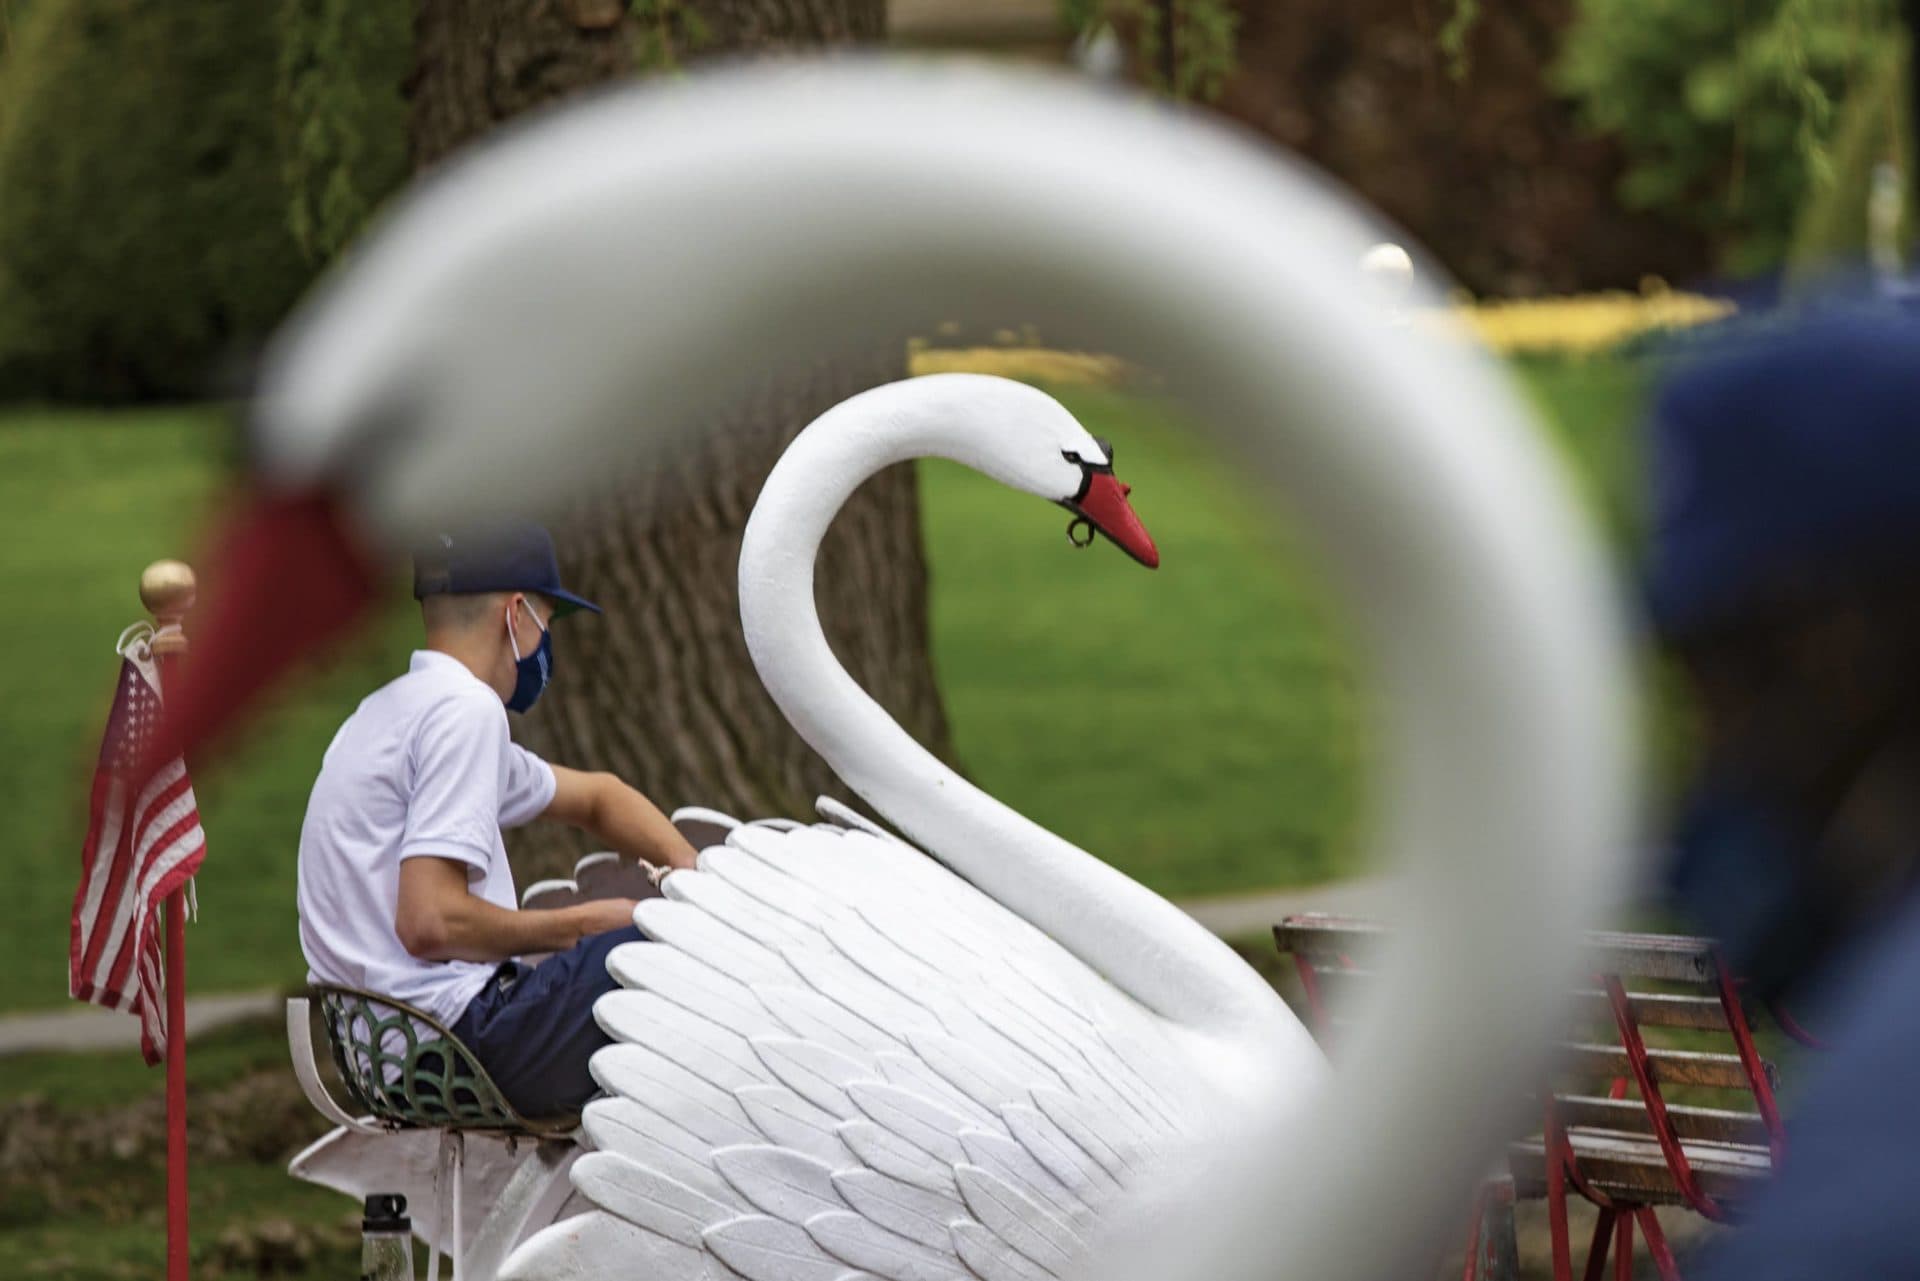 Two swan boats pass by one another in the Public Garden lagoon on the first day of operation on May 8, 2021. The swan boats did not operate in 2020 because of pandemic restrictions prohibiting people from gathering in public places. (Jesse Costa/WBUR)